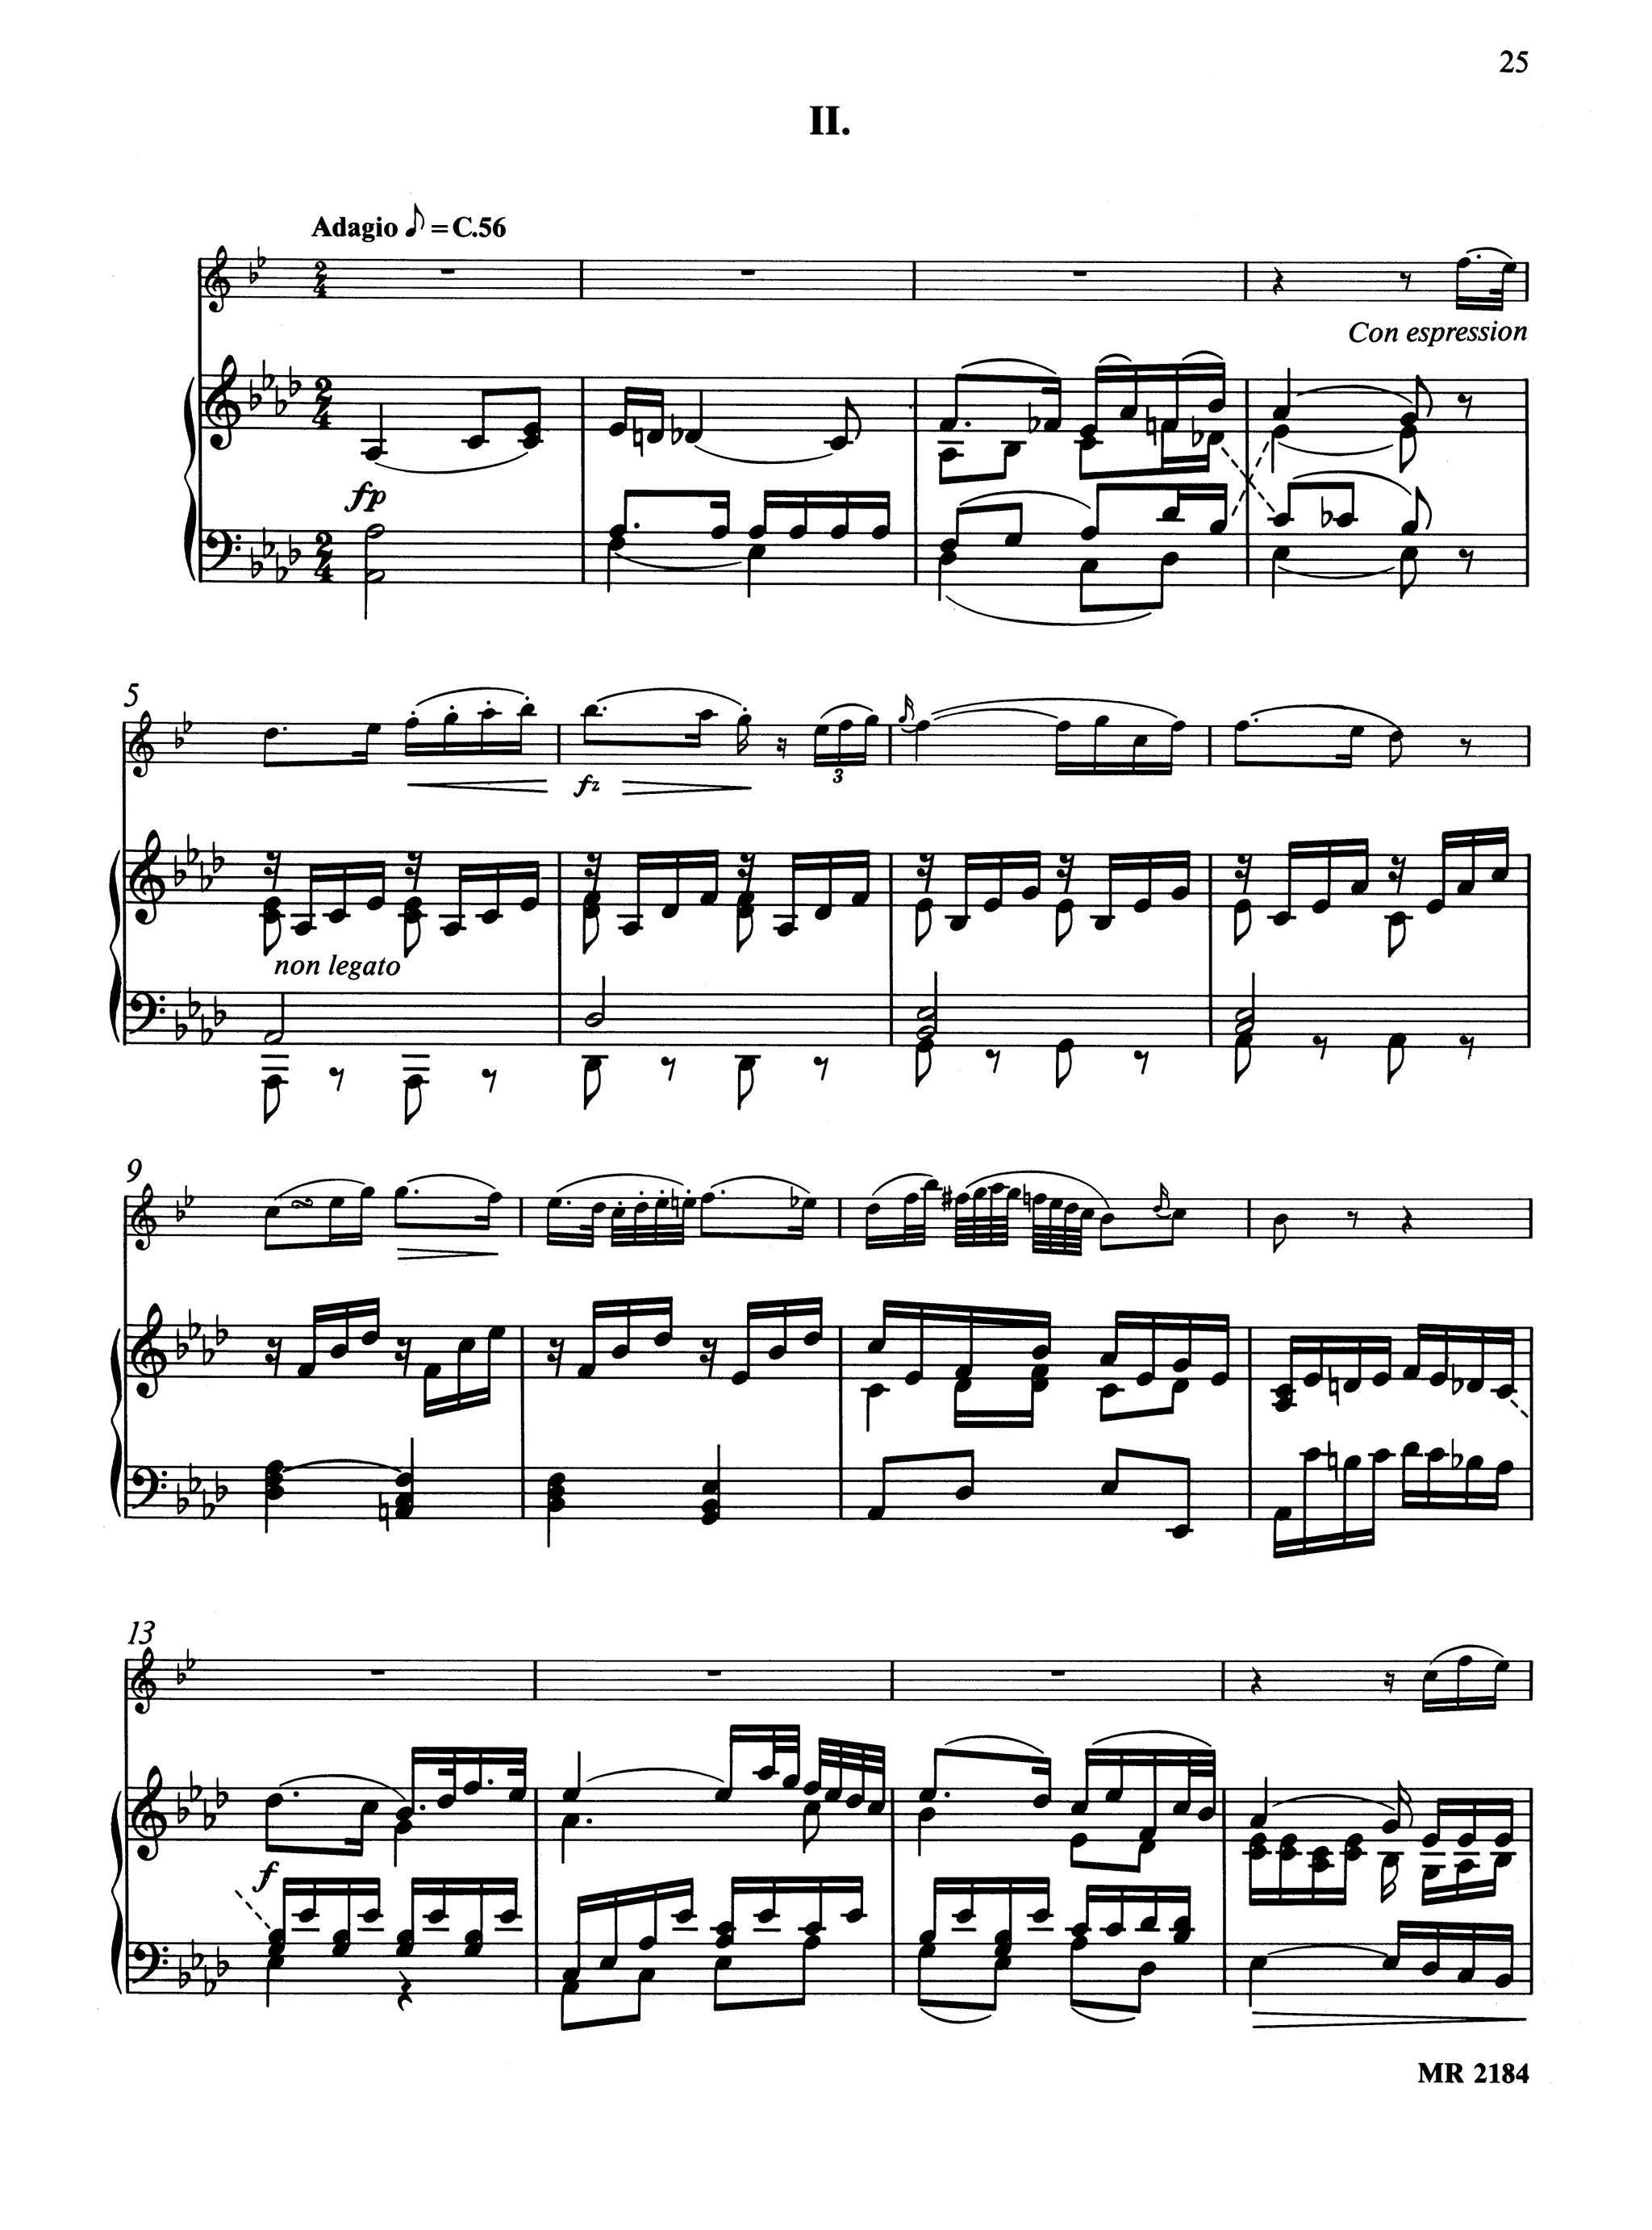 Crusell Clarinet Concerto in E-flat Major, Op. 1 - Movement 2